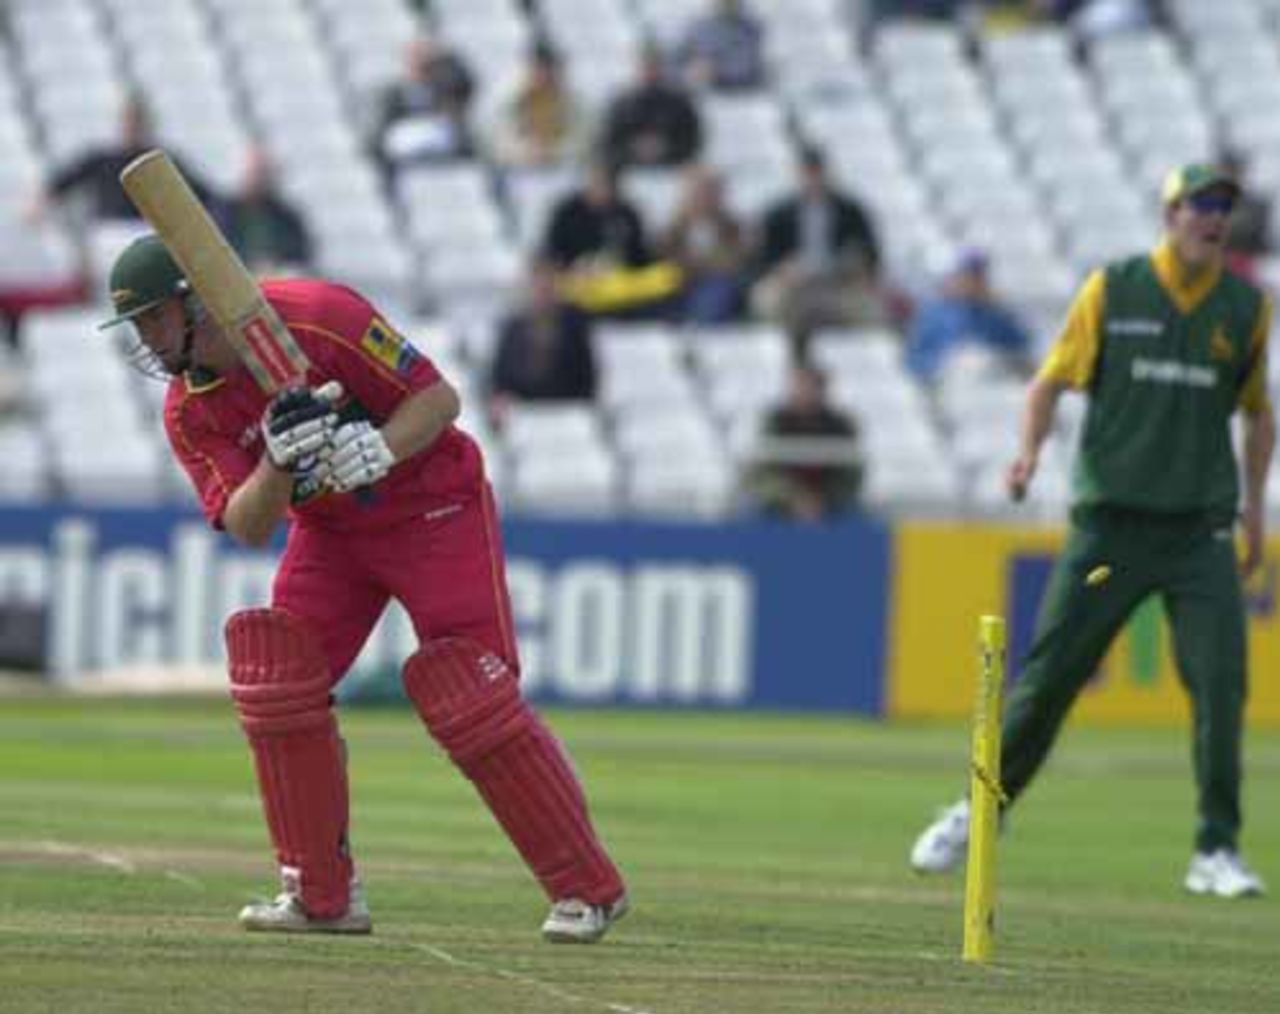 Ward bowled by Harris after making 13 runs for the Leicestershire Foxes at Trent Bridge 16th September 2001